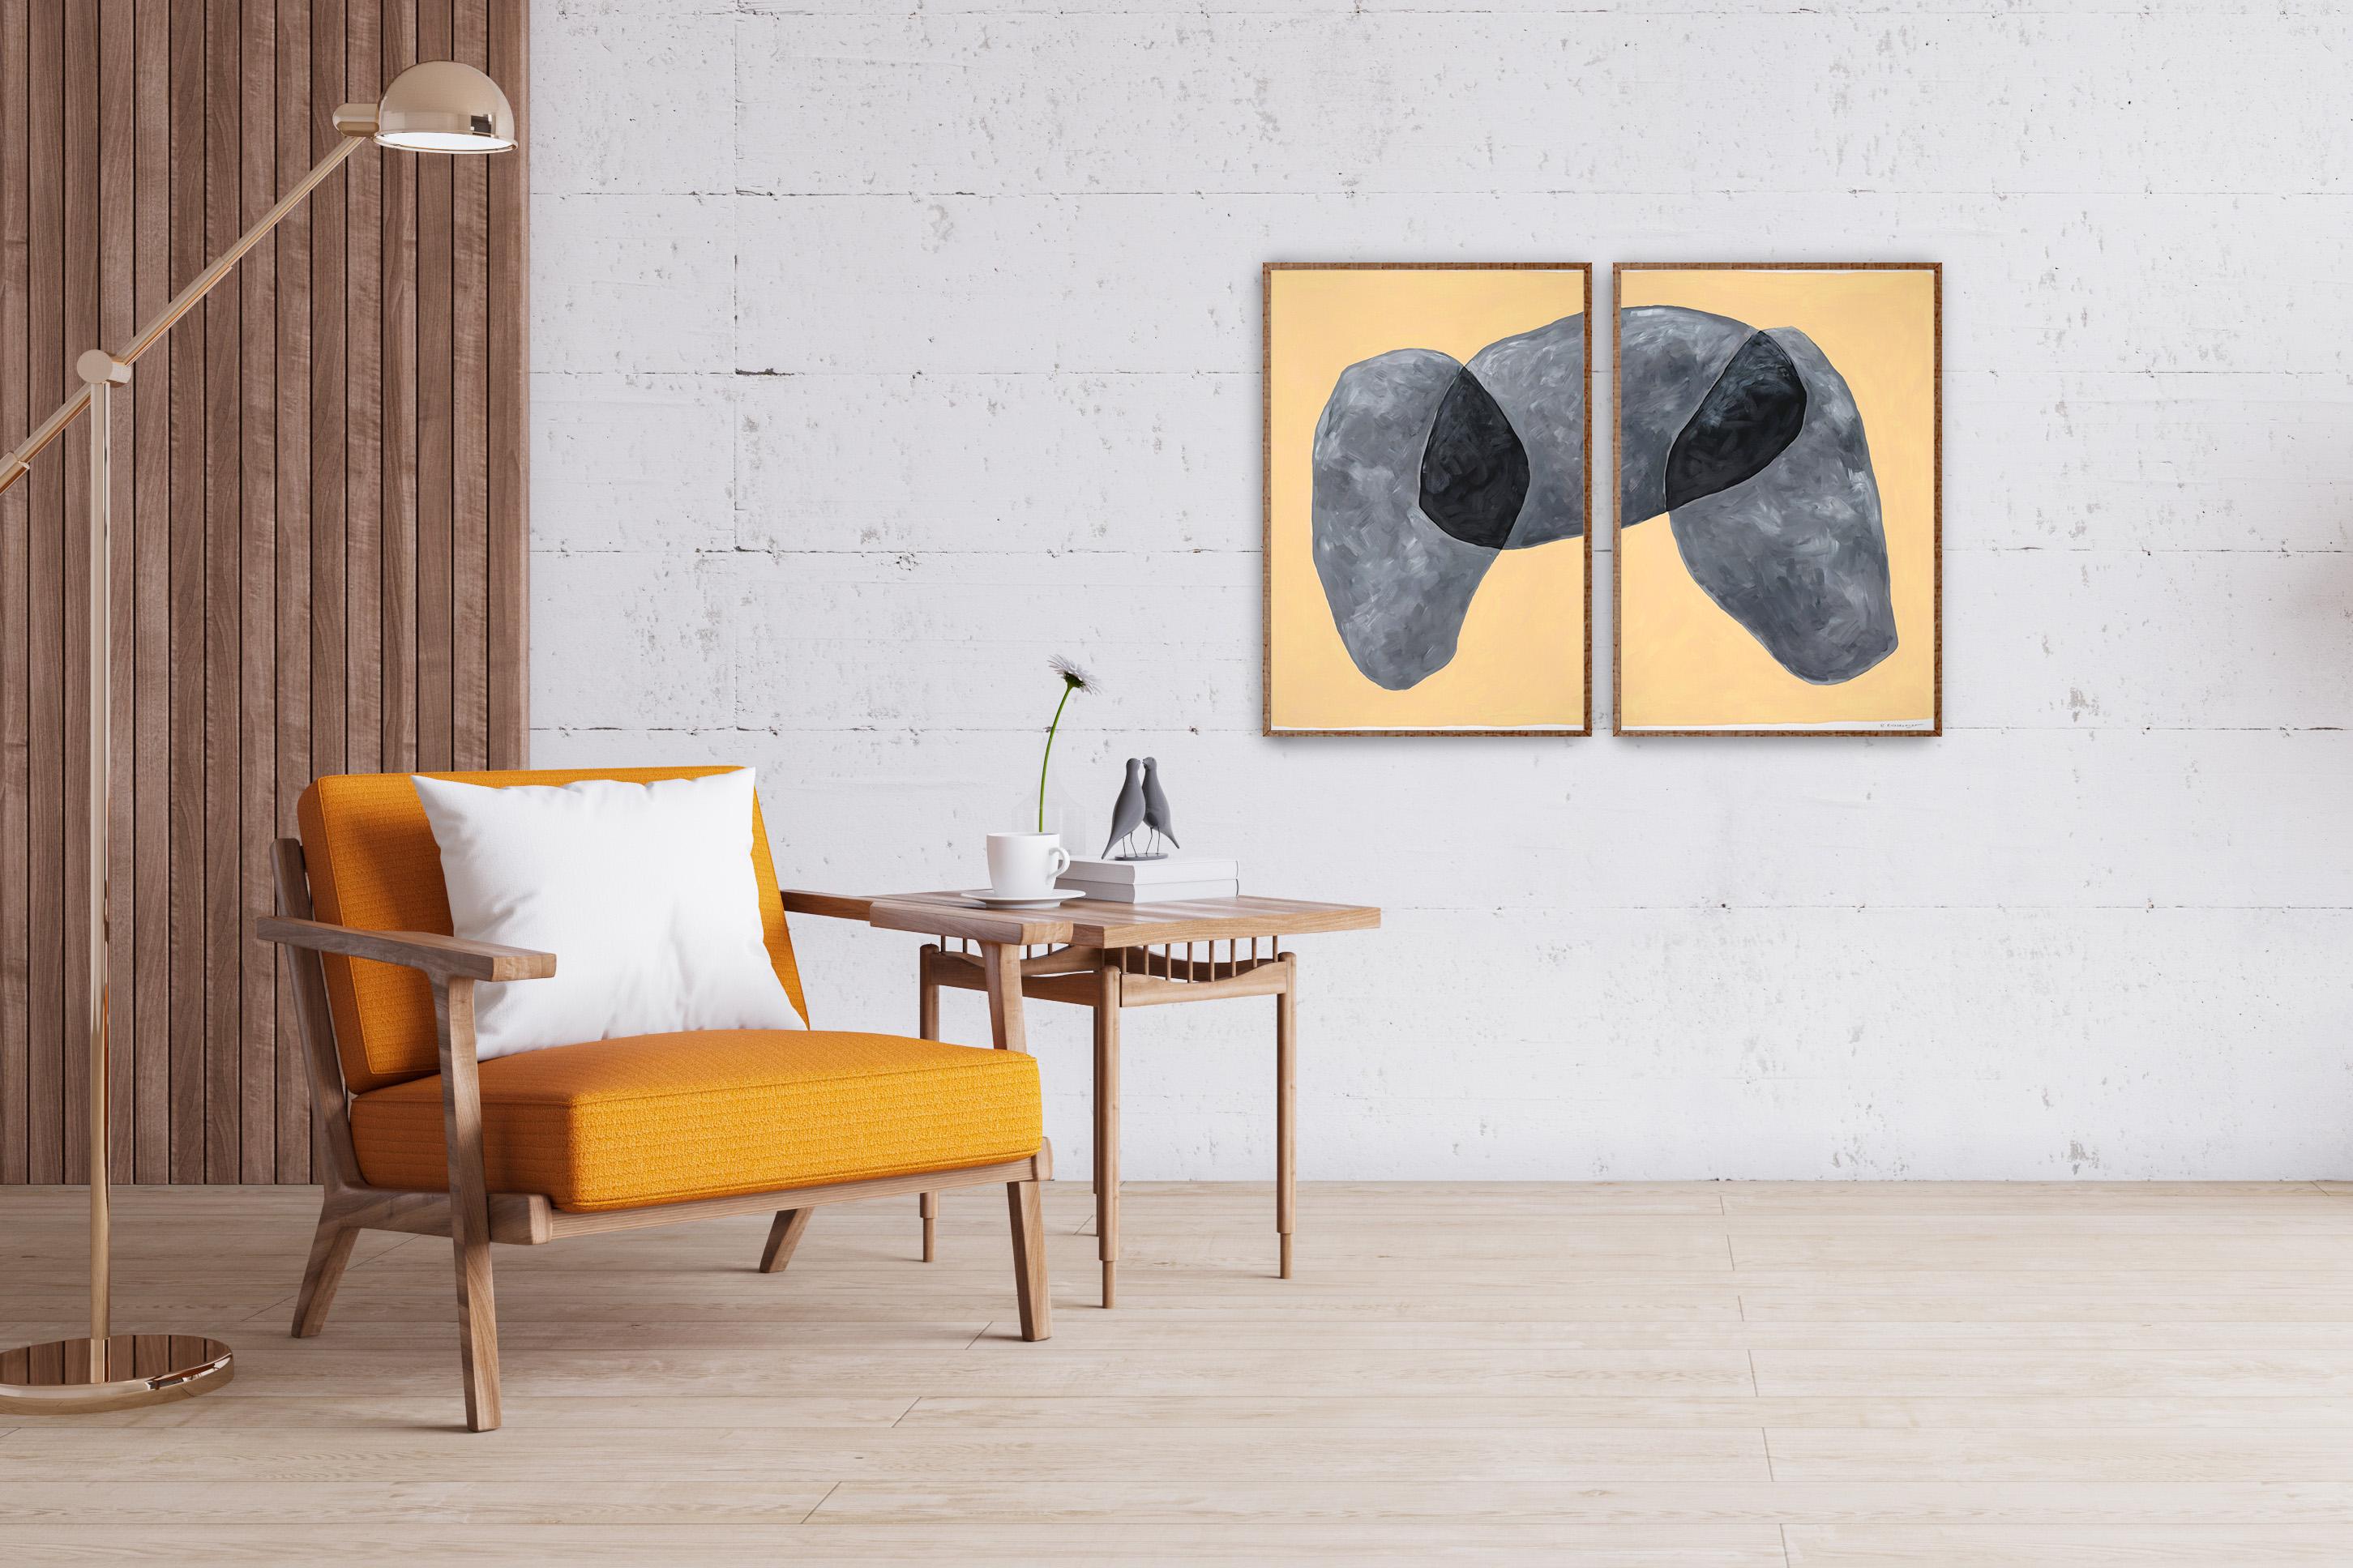 Dolmen Boulders, Abstract Diptych on Gray Tones, Tan Background, Geology Shapes - Naturalistic Painting by Ryan Rivadeneyra